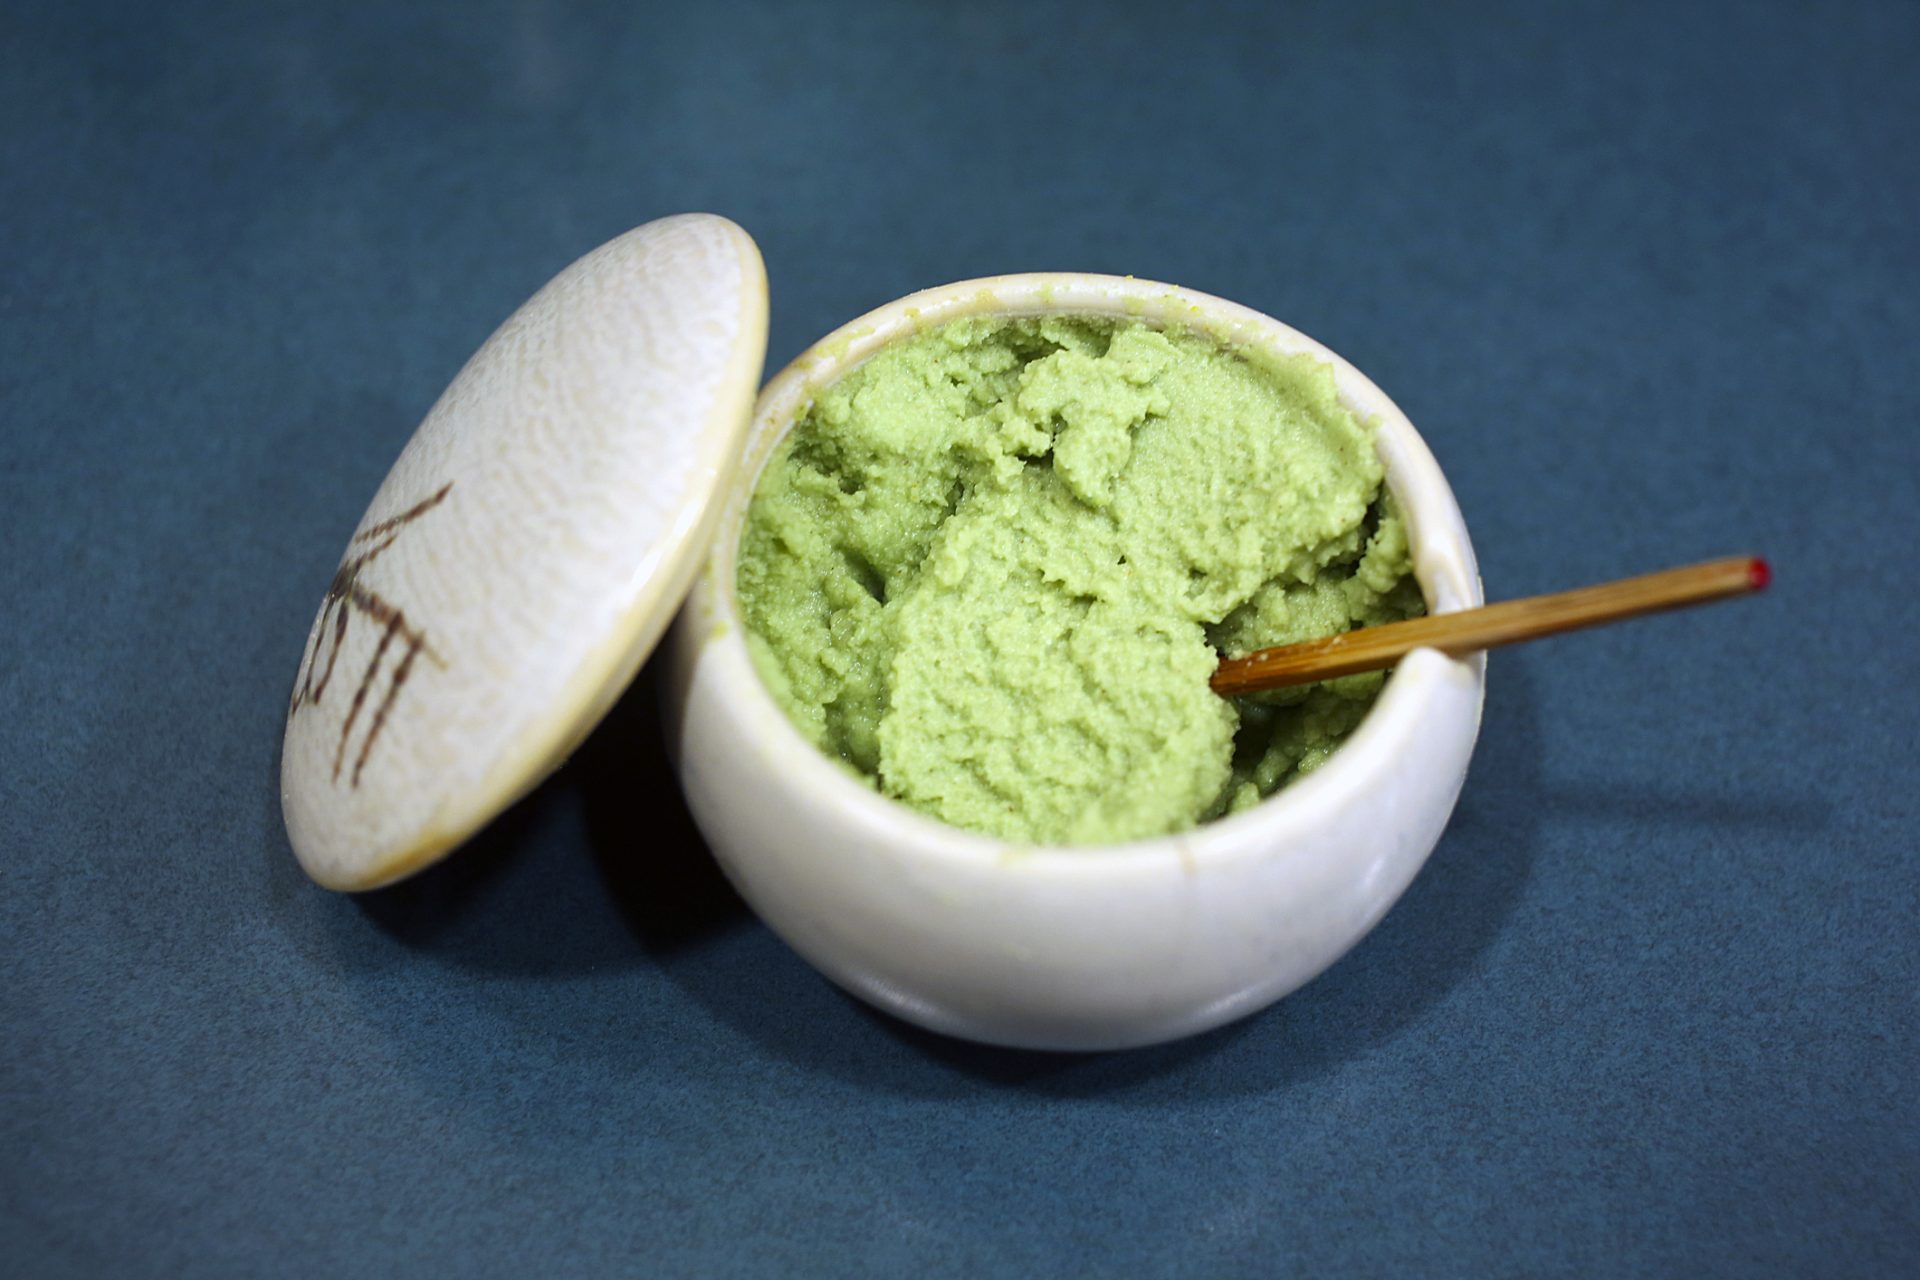 Eating wasabi can have a surprising impact on your health